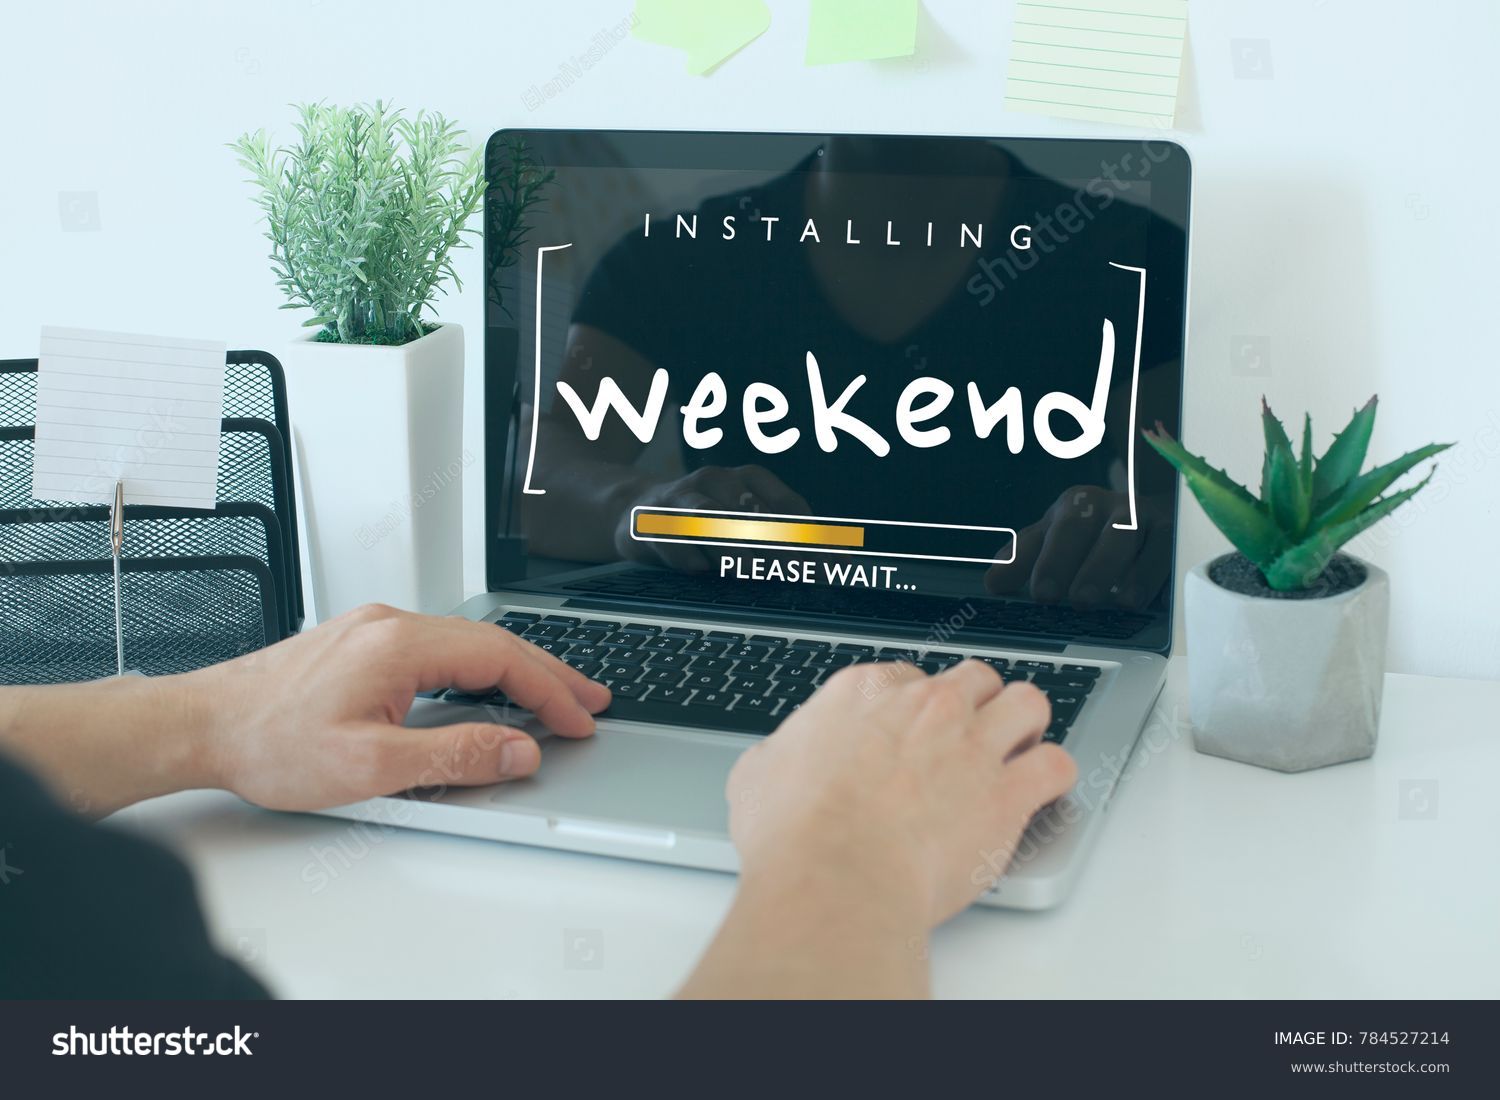 Installing weekend please wait note concept / Hands on laptop in office #784527214